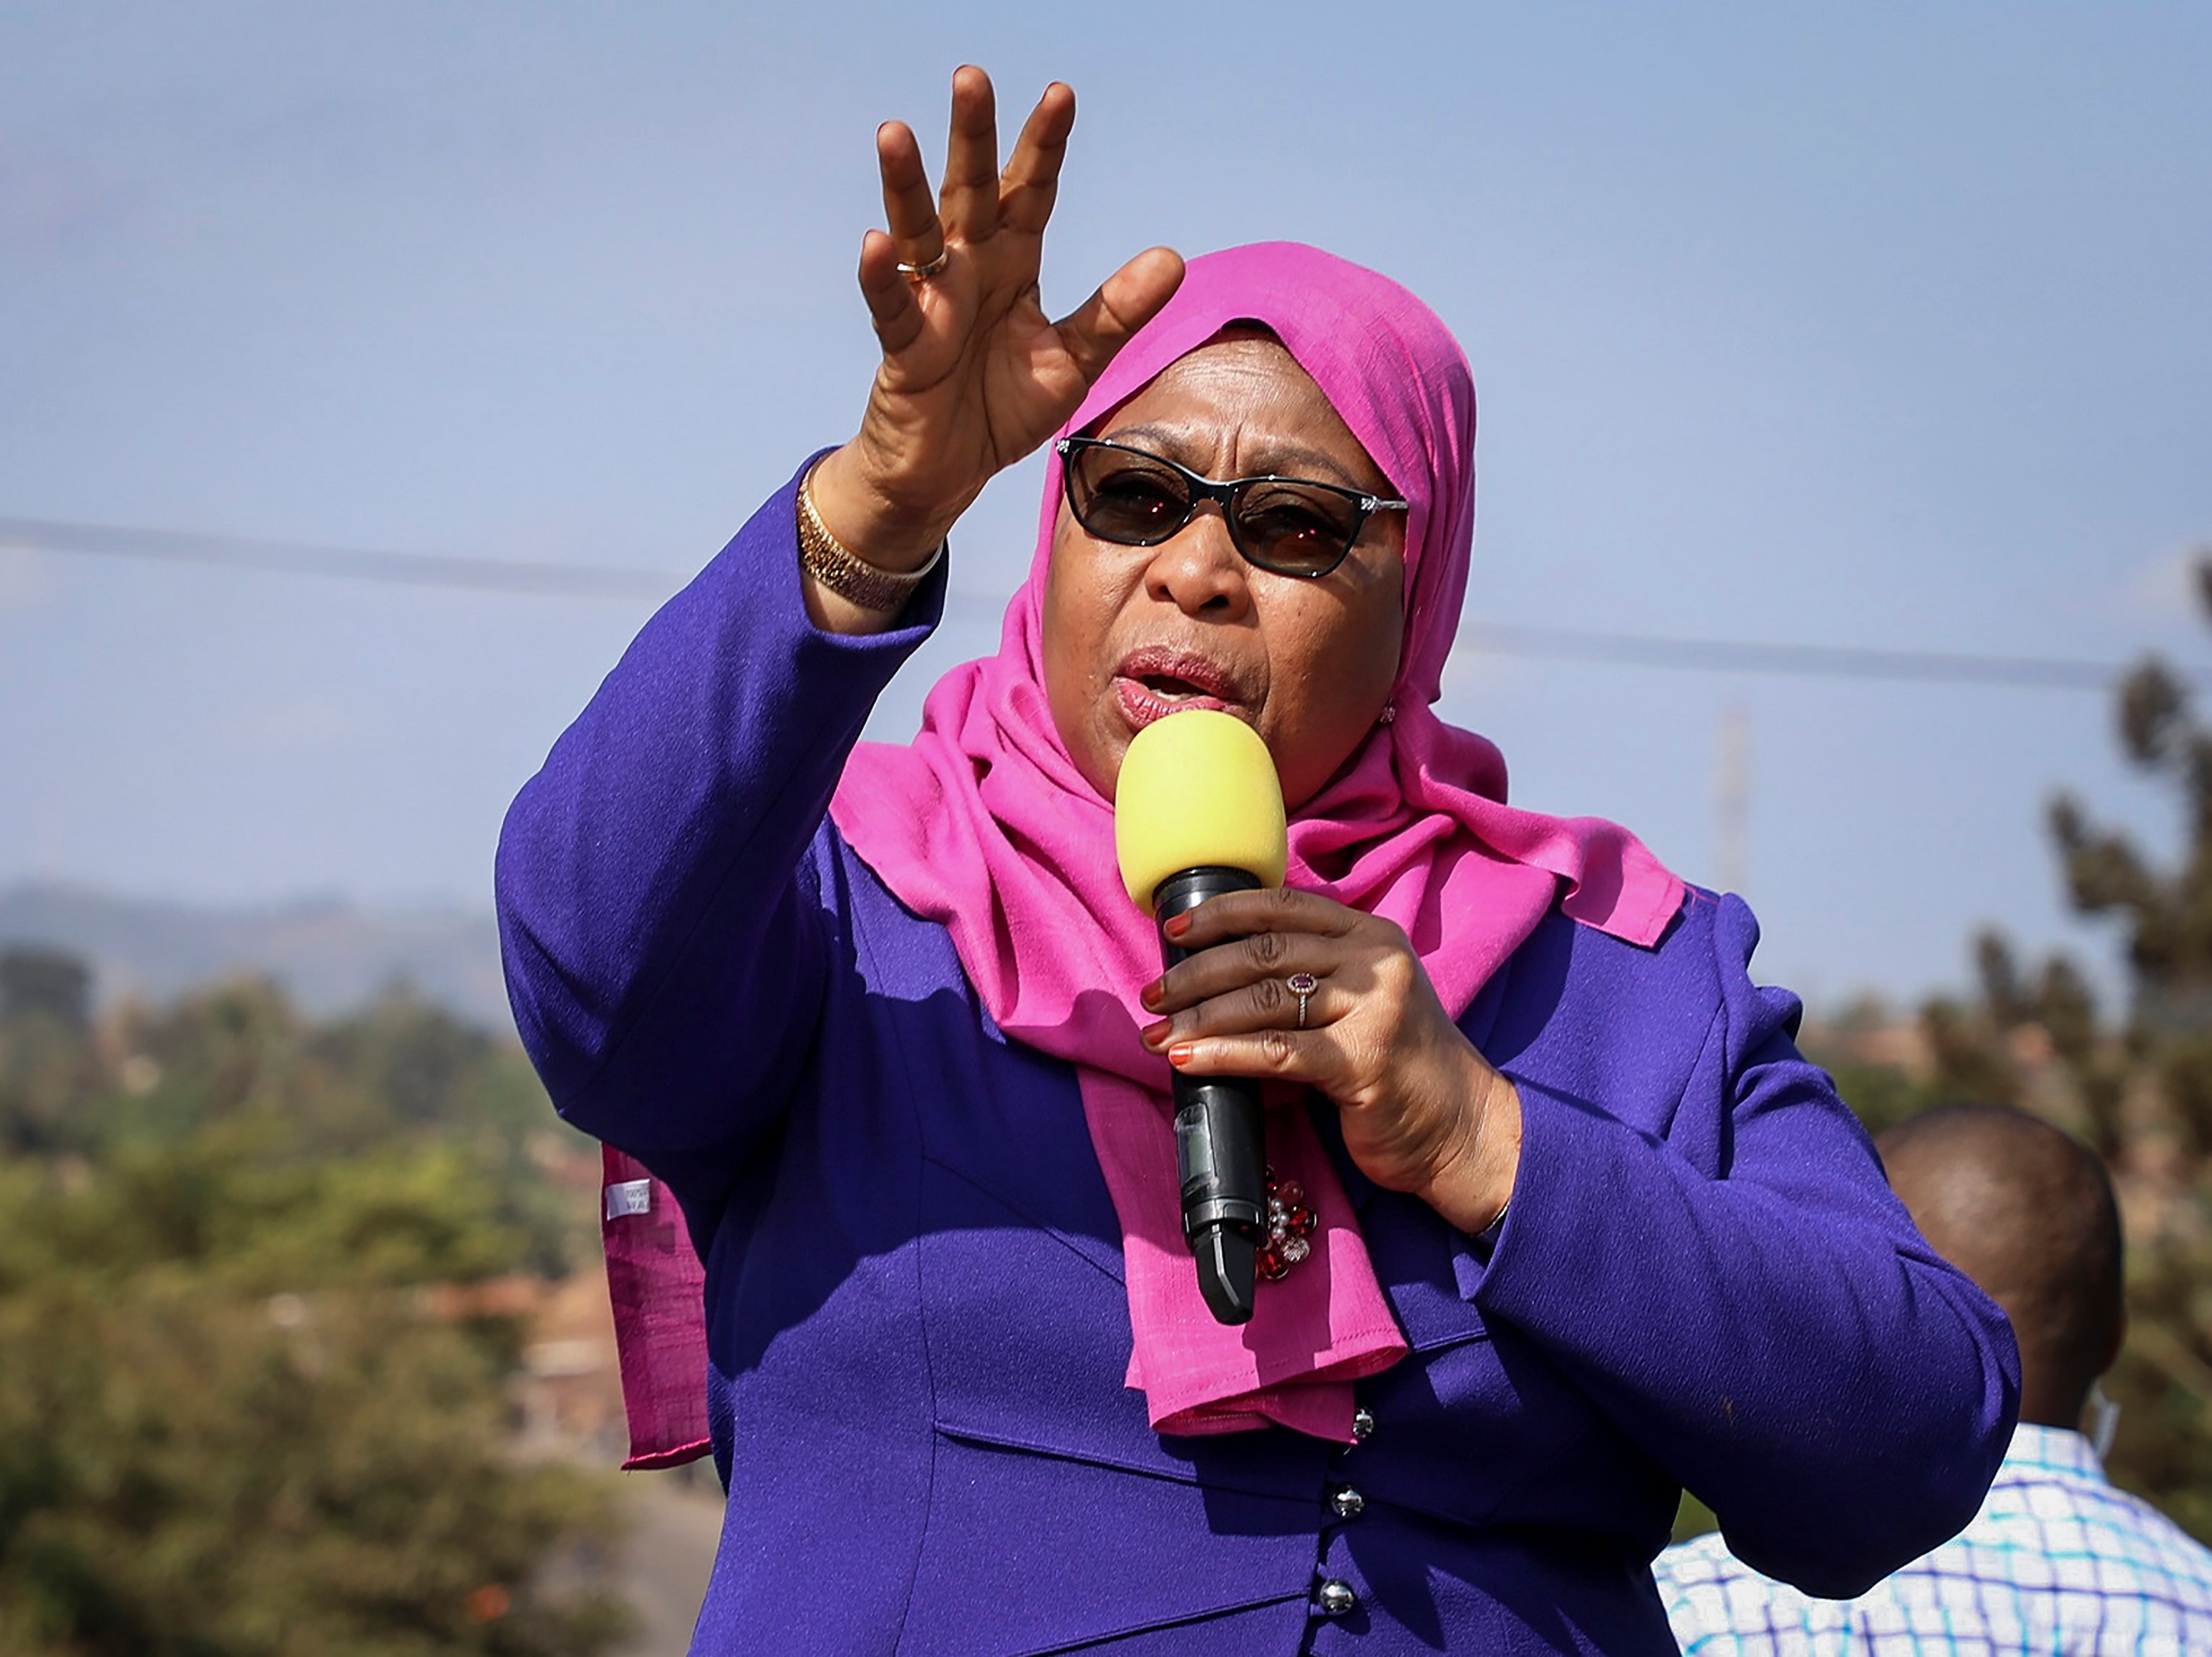 Hassan is currently the only female political leader in Africa